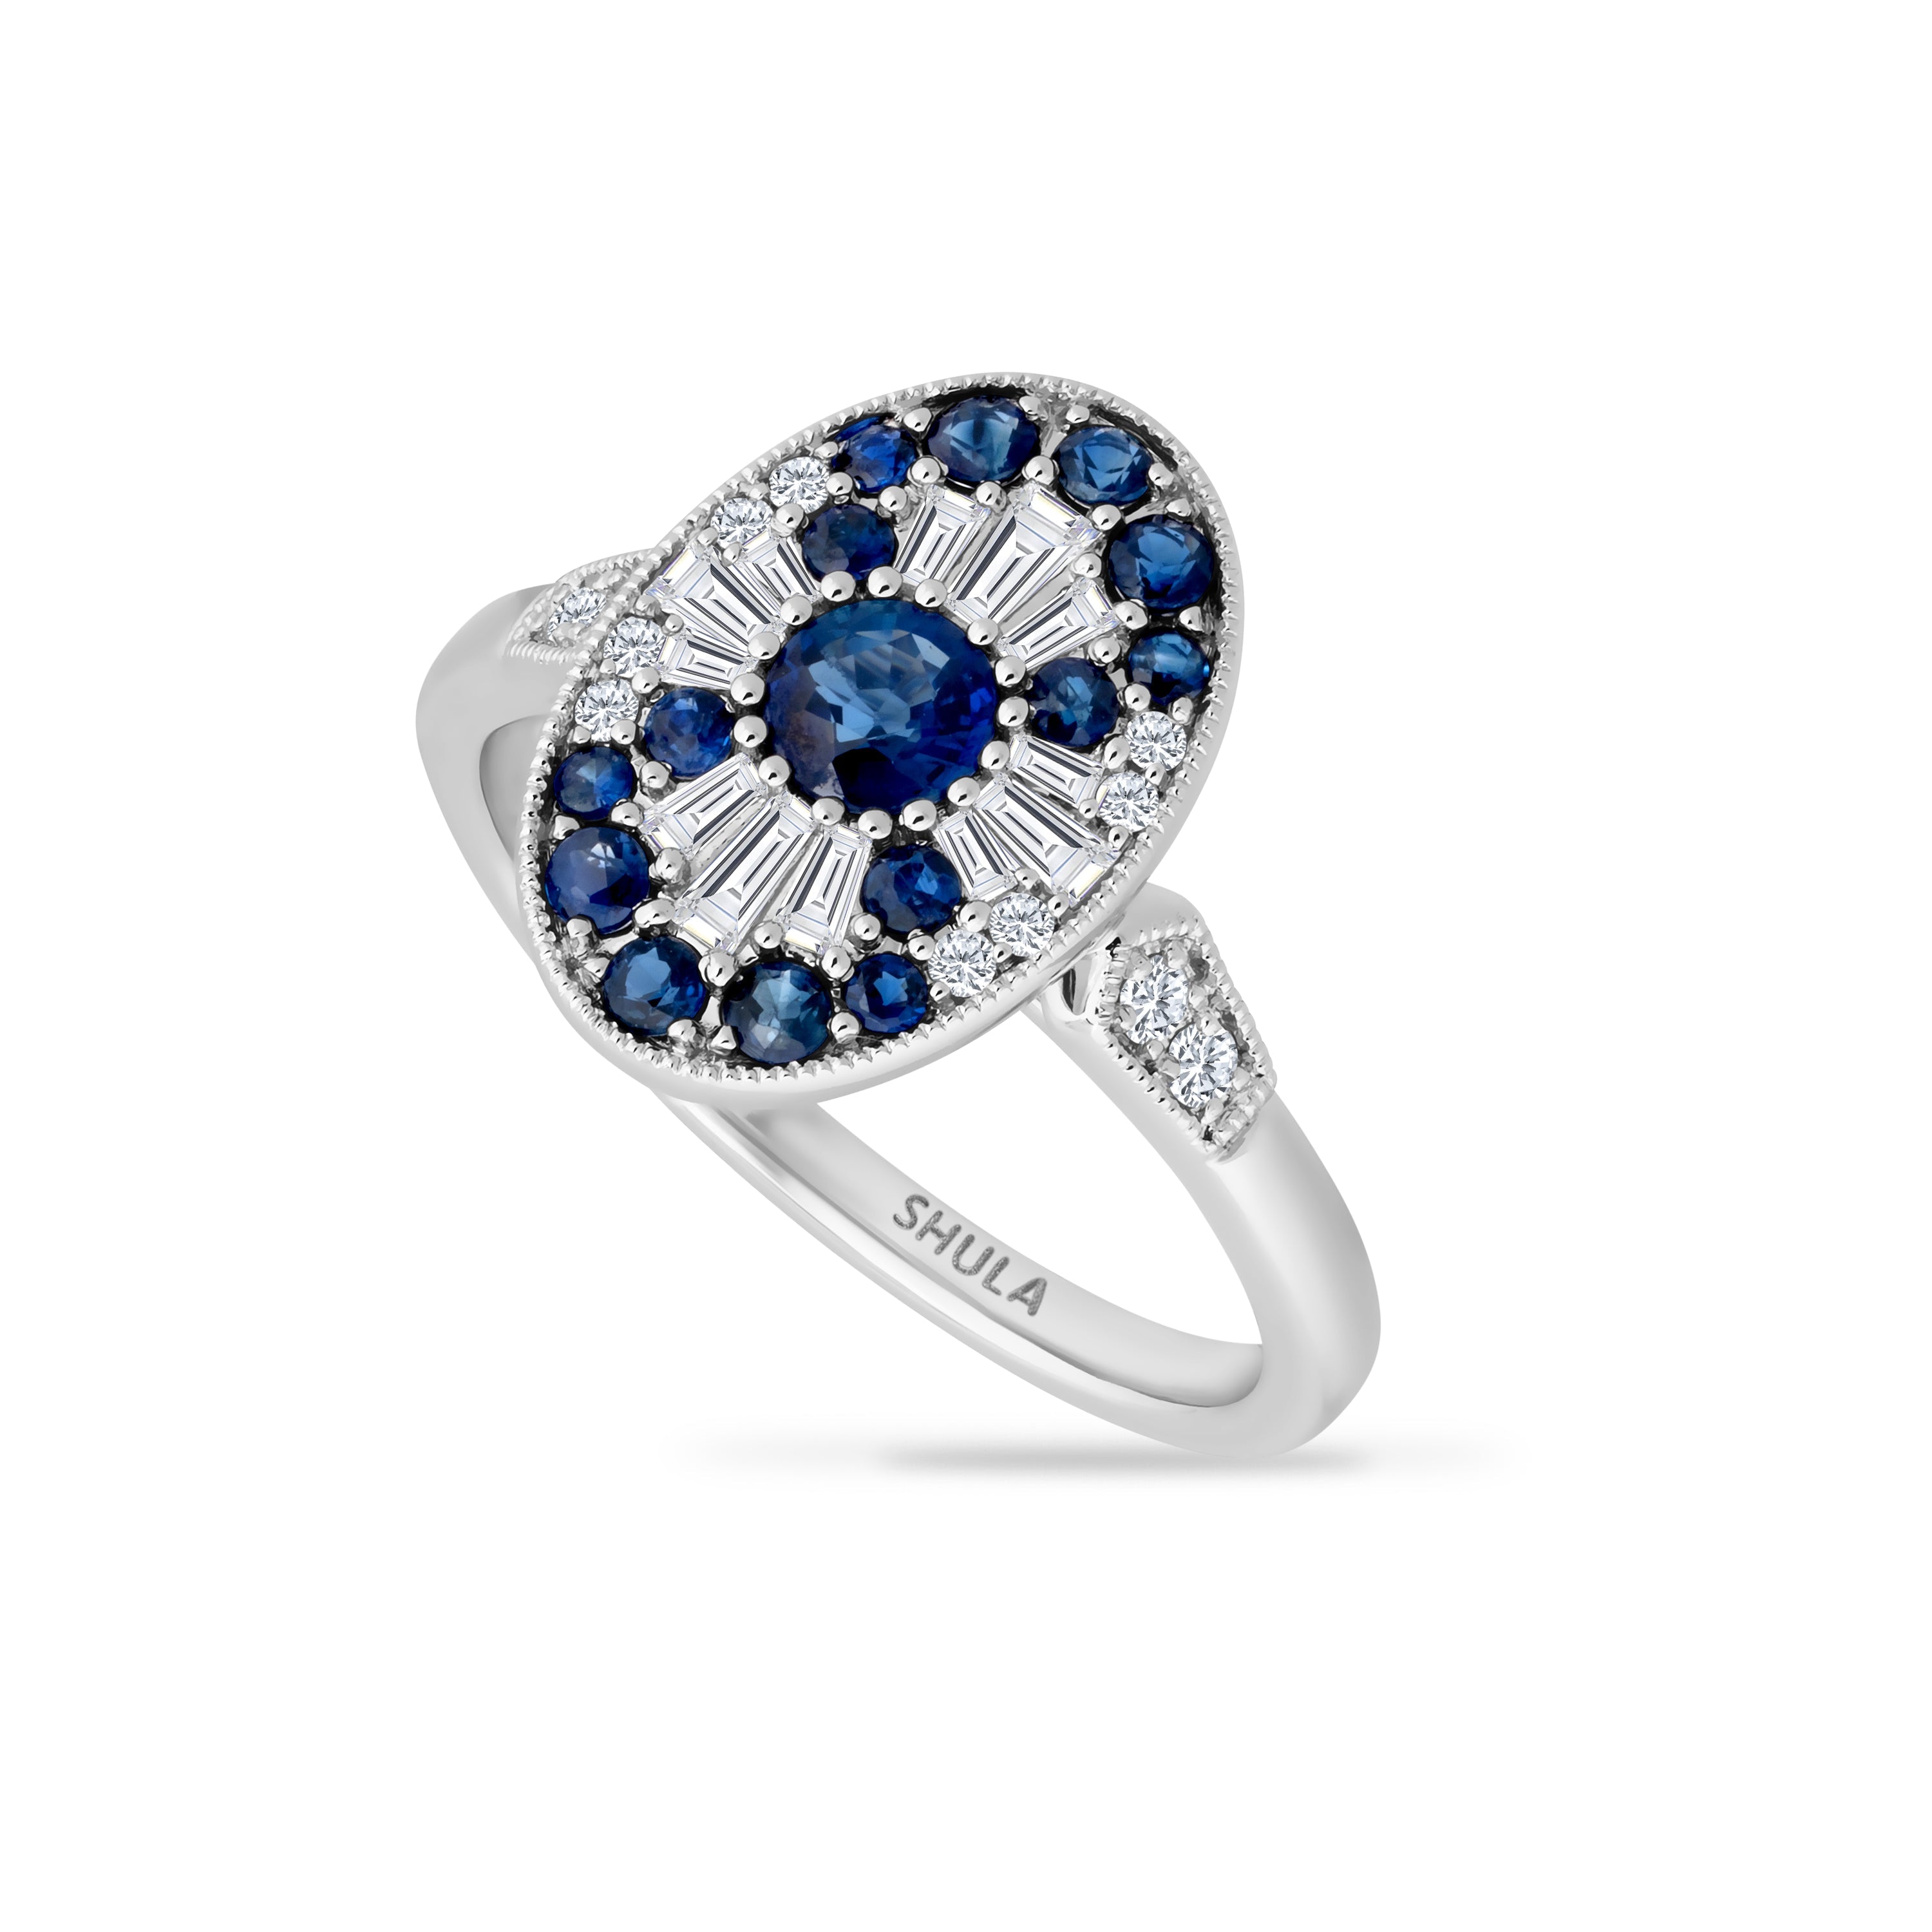 14K RING WITH 12 ROUND DIAMONDS 0.09CT, 12 BAGUETTE DIAMONDS 0.16CT & 15 BLUE SAPPHIRES 0.78CT